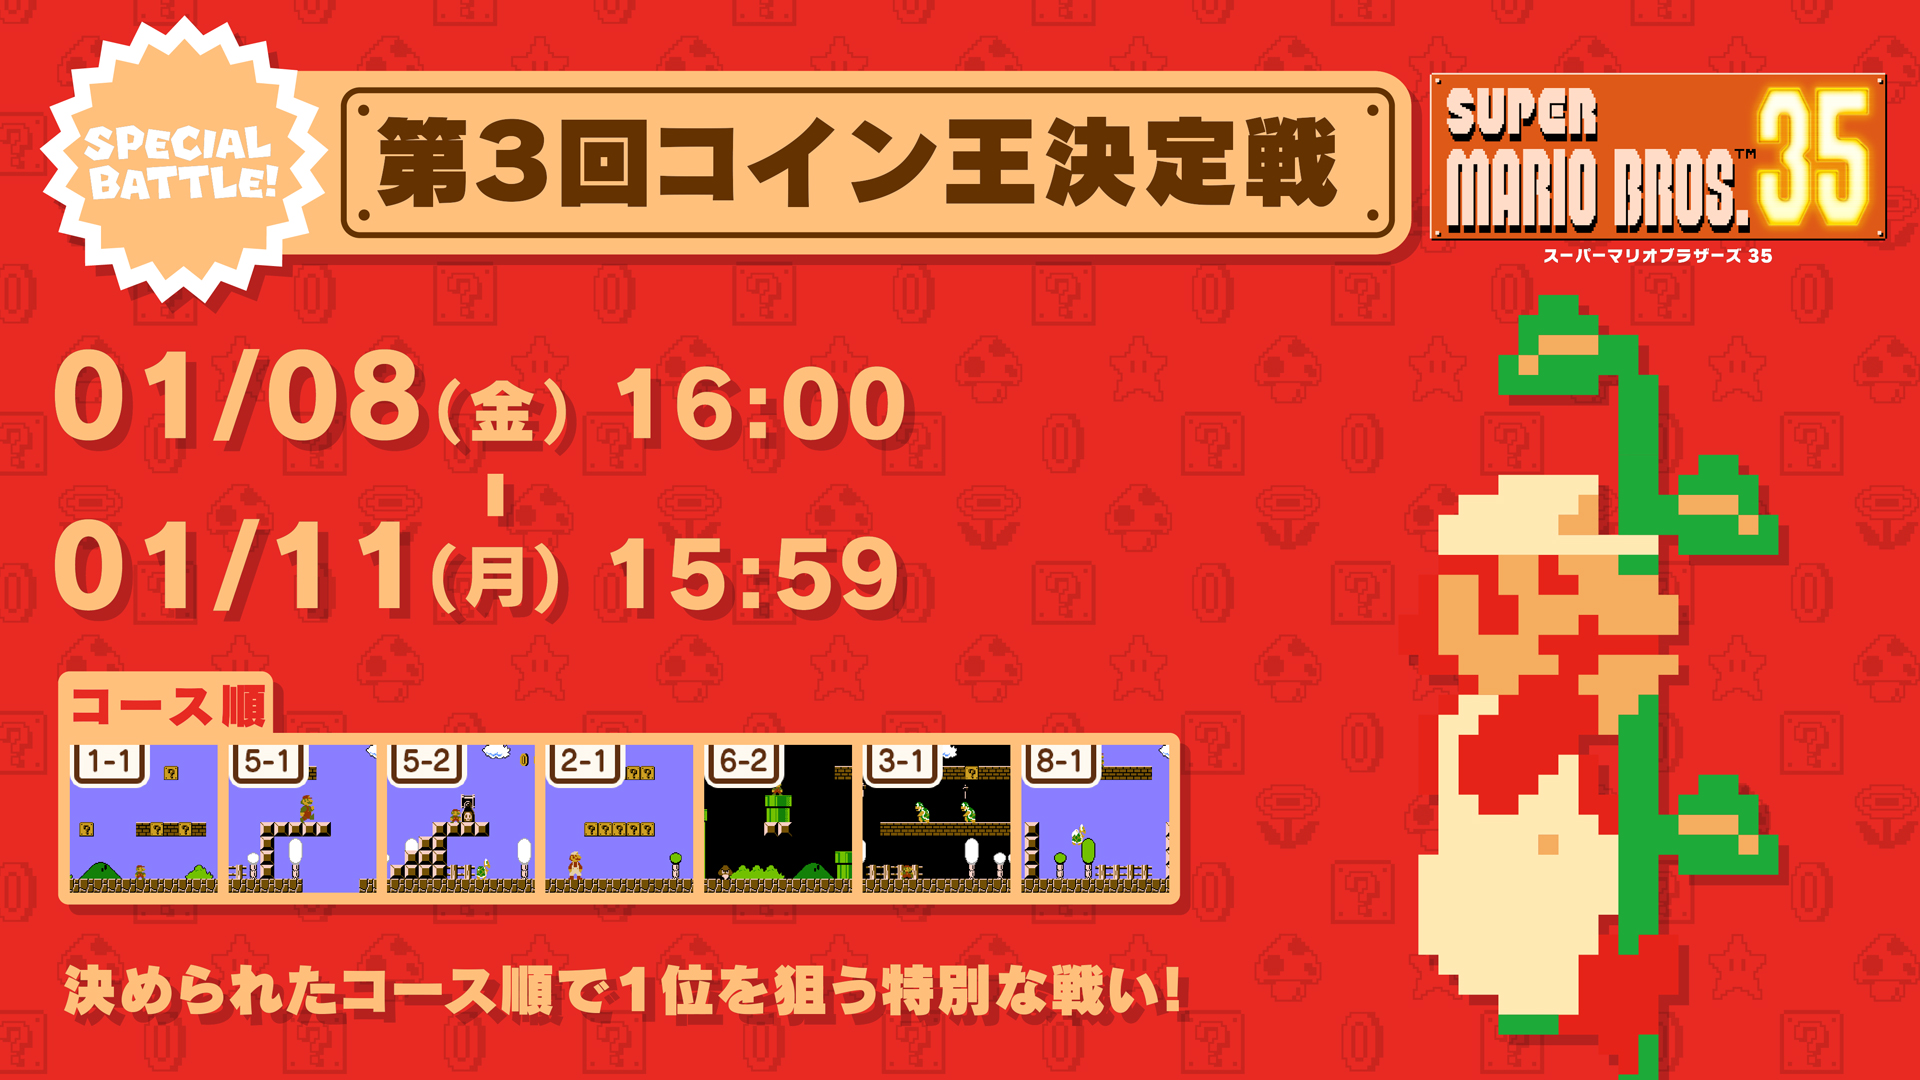 Super Mario Bros 35 New Special Battle Event Announced For January 8 Nintendo Everything